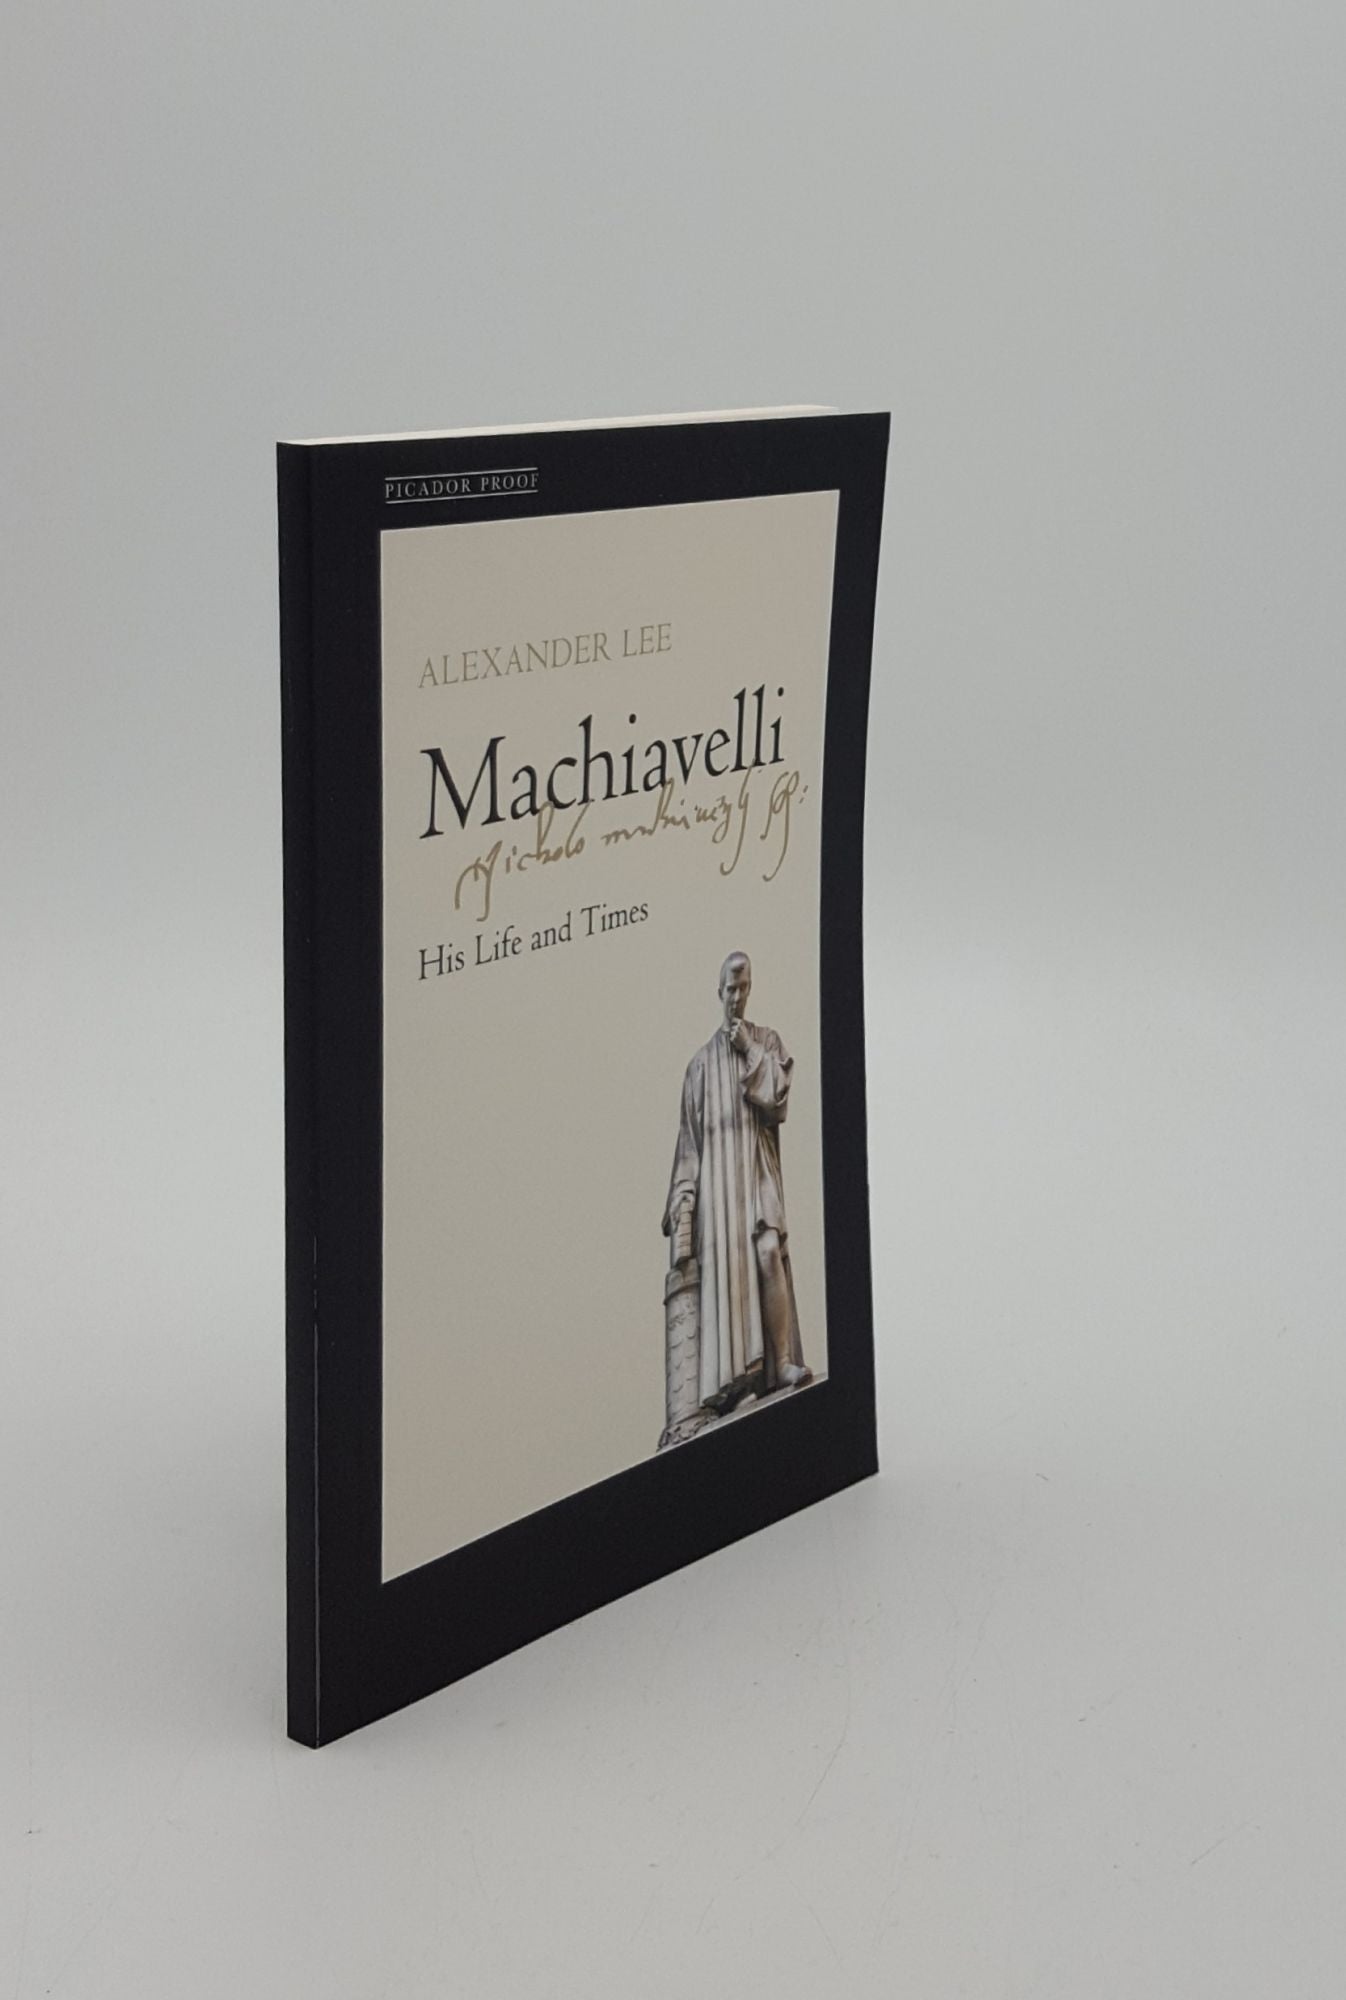 LEE Alexander - Machiavelli His Life and Times